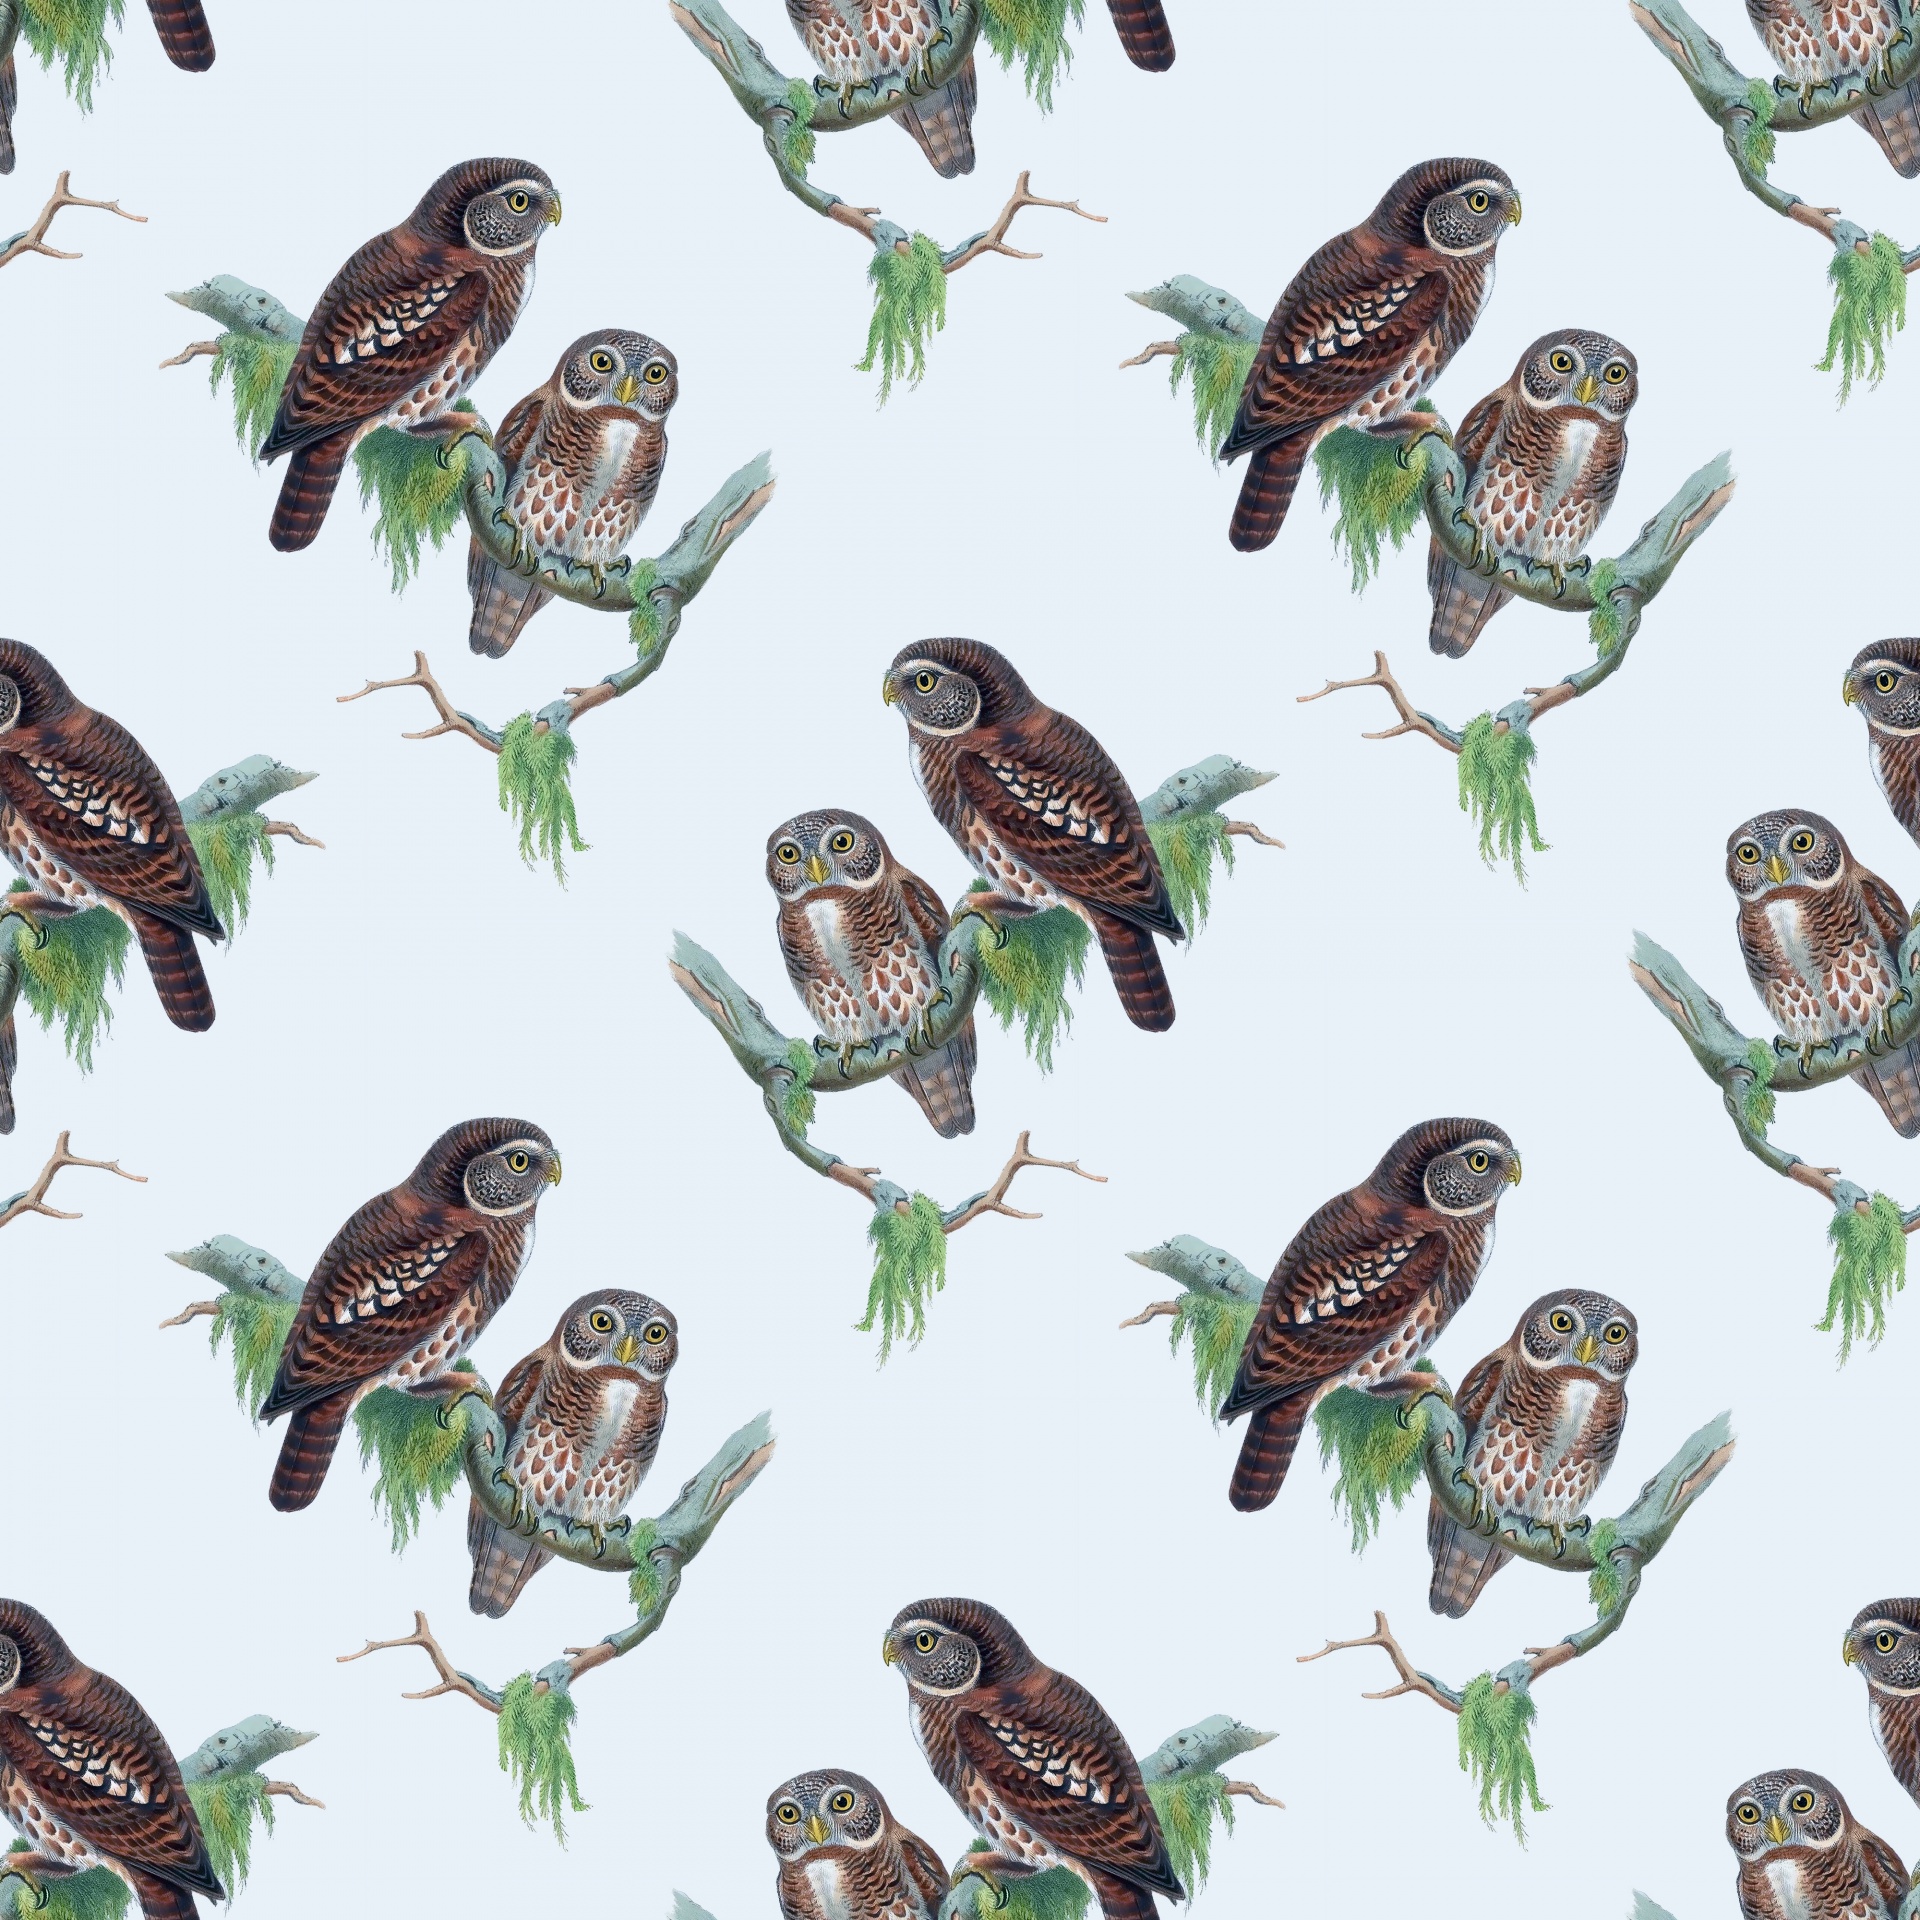 owls-vintage-wallpaper-background-free-stock-photo-public-domain-pictures